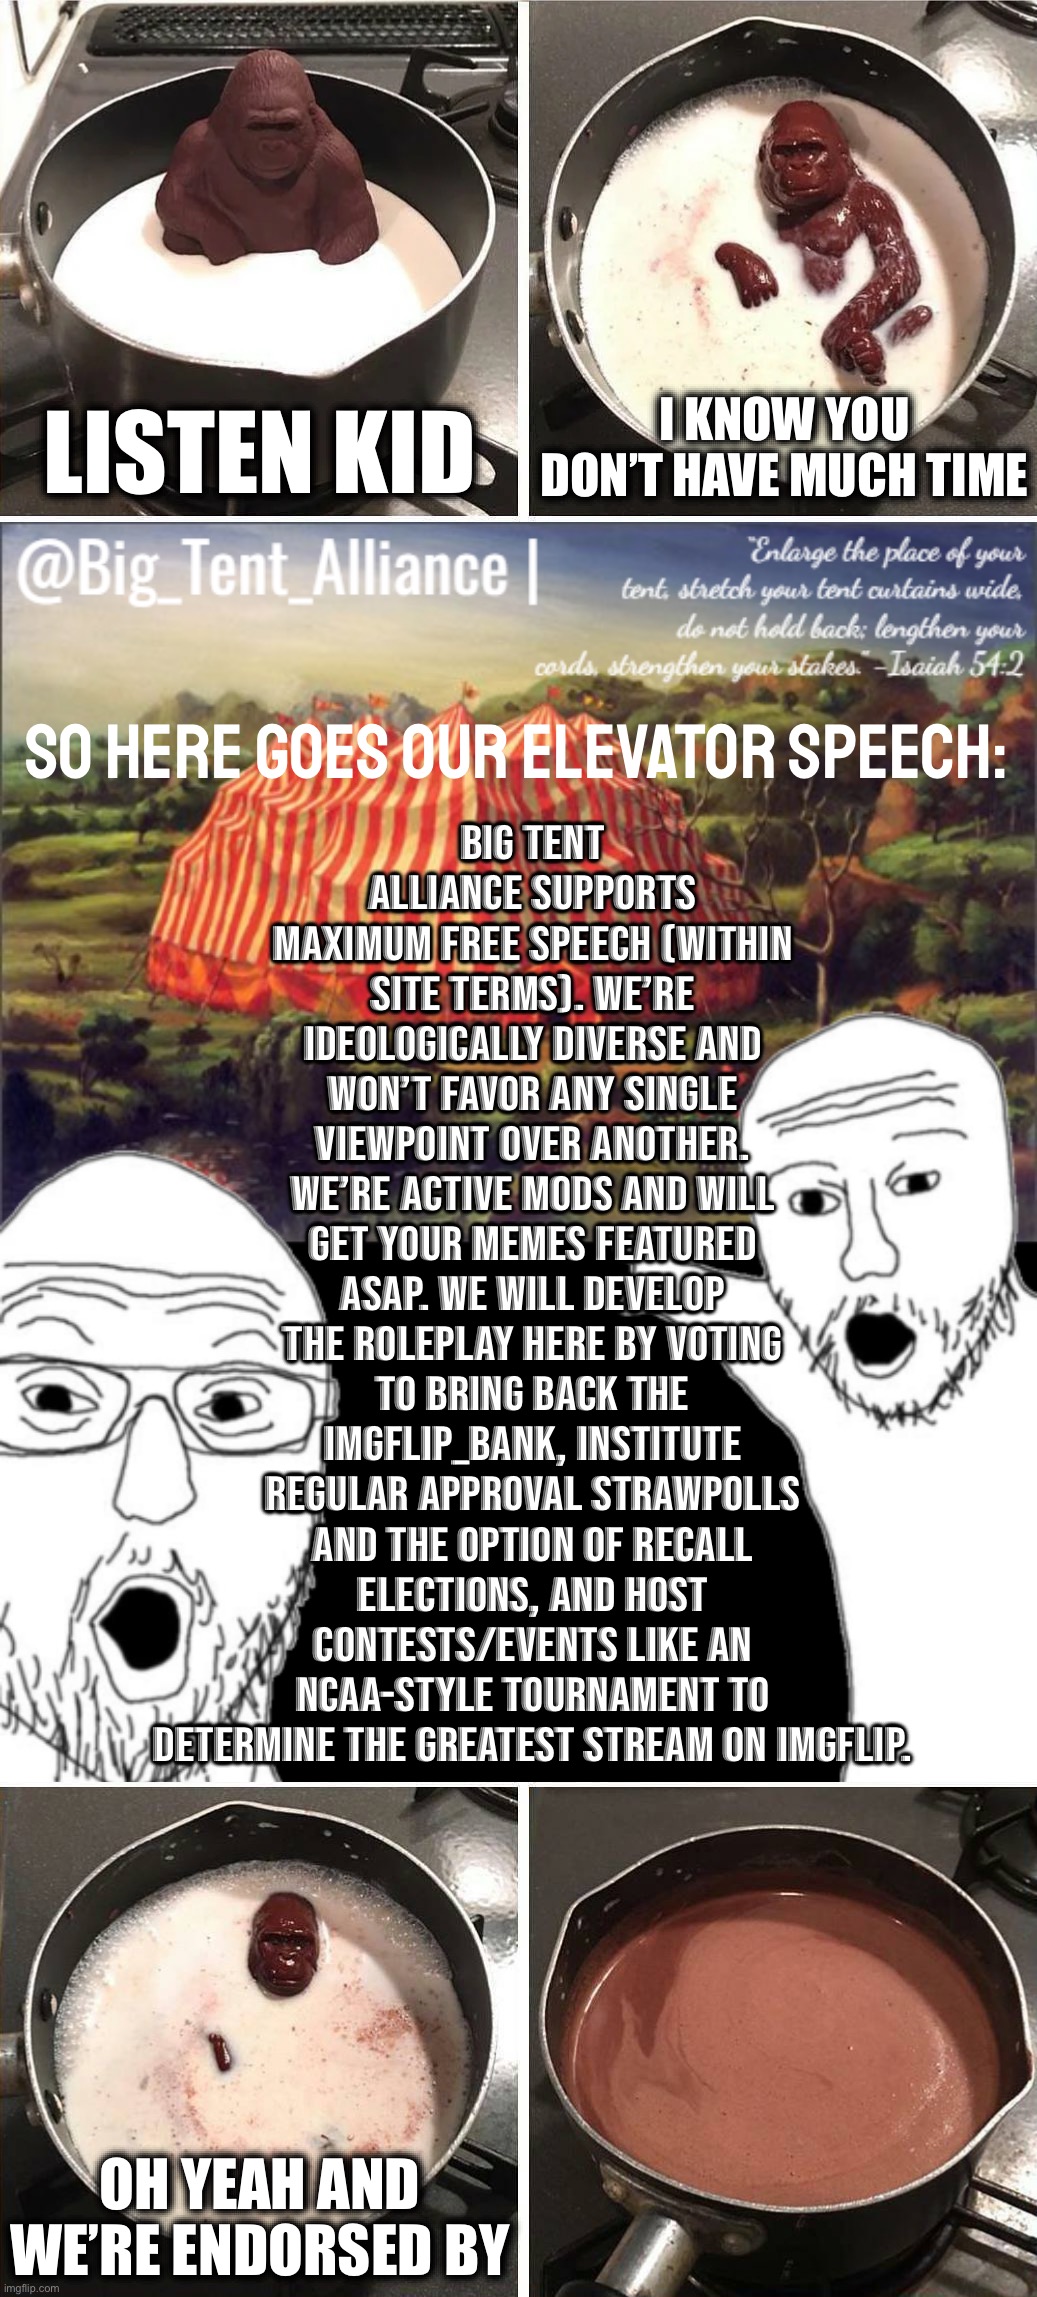 Big Tent Announcement: Elevator Speech | I KNOW YOU DON’T HAVE MUCH TIME; LISTEN KID; Big Tent Alliance supports maximum free speech (within site terms). We’re ideologically diverse and won’t favor any single viewpoint over another. We’re active mods and will get your memes featured ASAP. We will develop the roleplay here by voting to bring back the Imgflip_Bank, institute regular approval strawpolls and the option of recall elections, and host contests/events like an NCAA-style tournament to determine the Greatest Stream on Imgflip. SO HERE GOES OUR ELEVATOR SPEECH:; OH YEAH AND WE’RE ENDORSED BY | image tagged in listen kid,big tent alliance announcement template,chocolate gorilla,big tent alliance,big tent energy,elevator speech | made w/ Imgflip meme maker